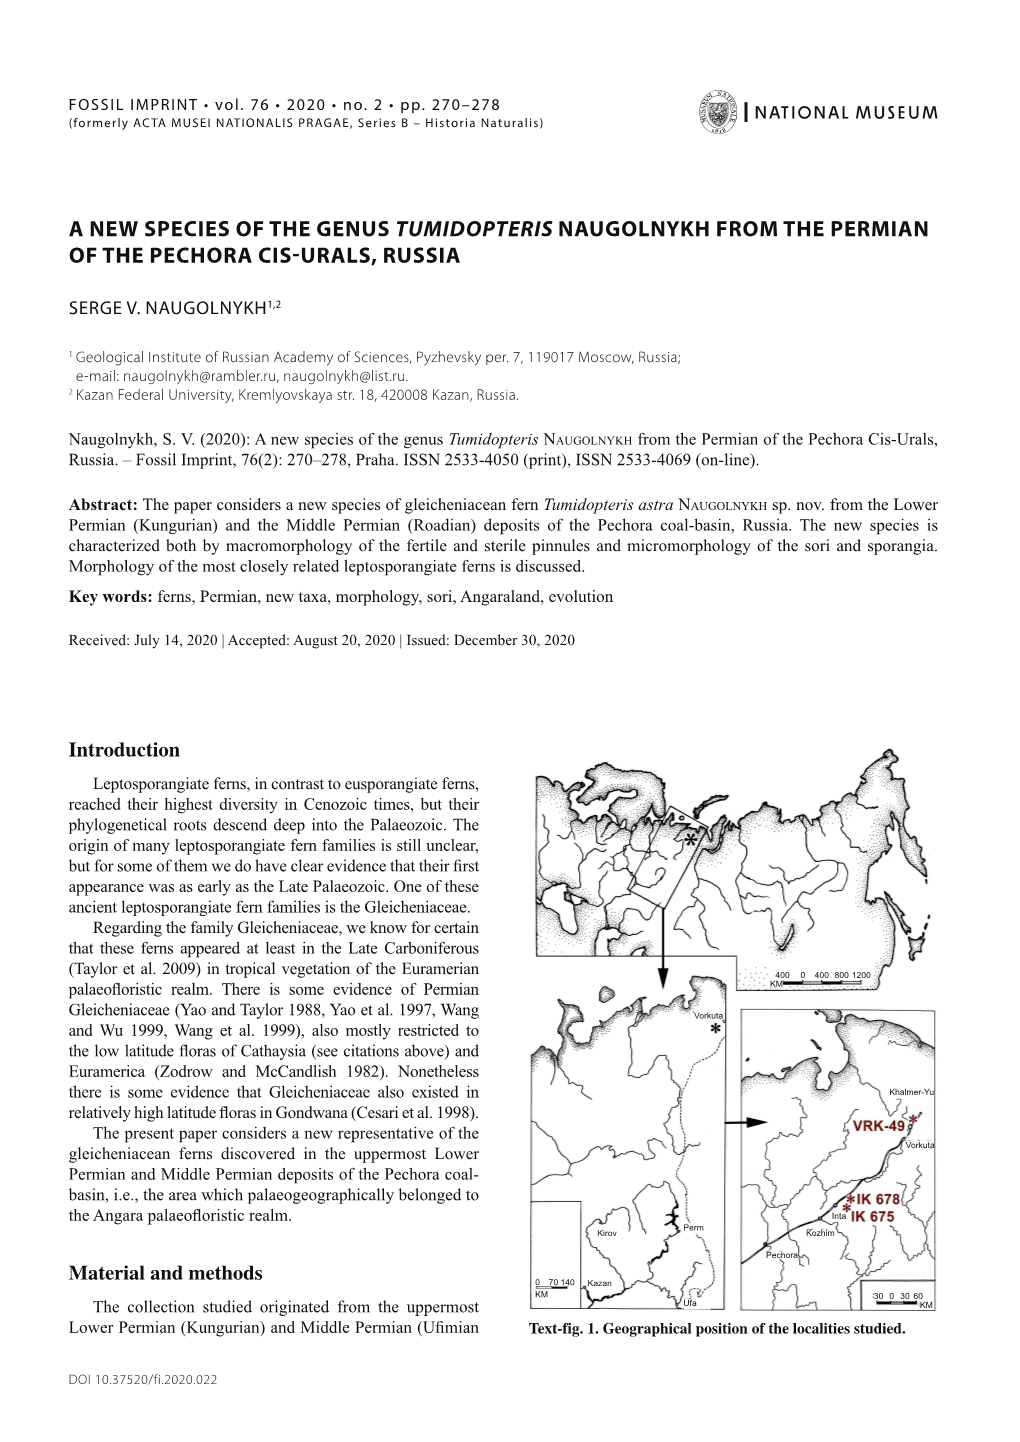 A New Species of the Genus Tumidopteris Naugolnykh from the Permian of the Pechora Cis-Urals, Russia